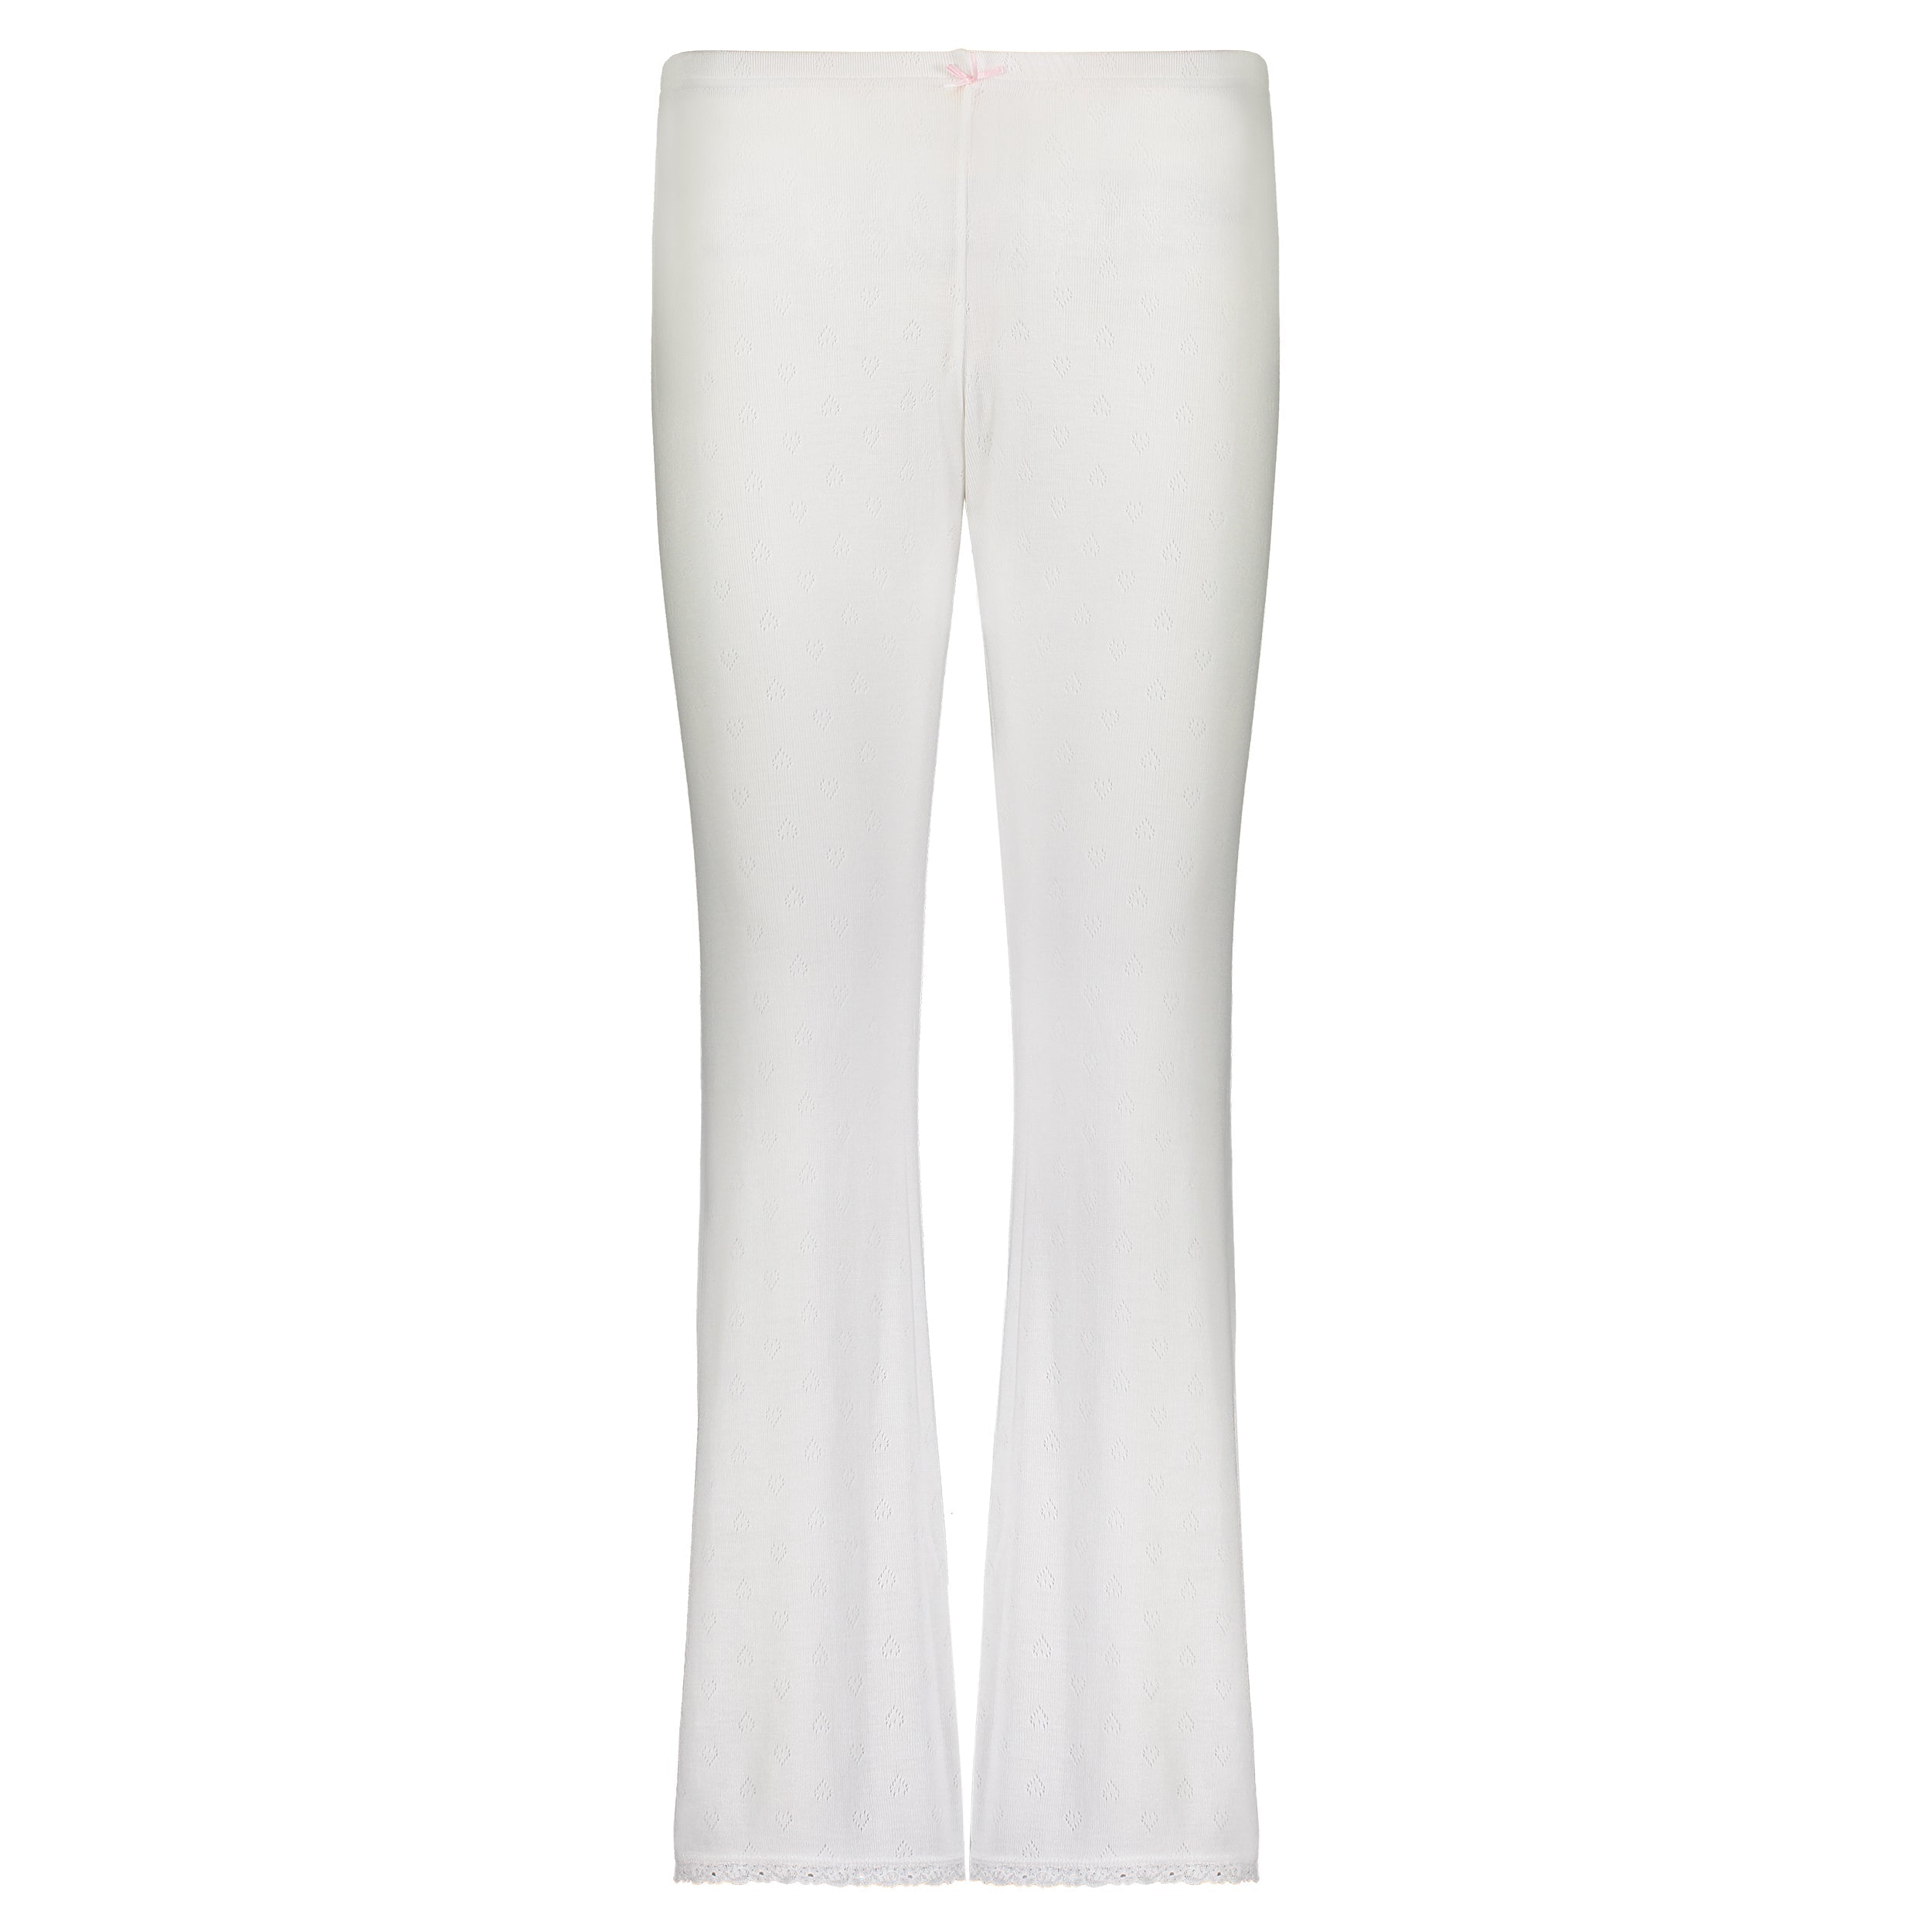 LONG PANT Hi Rise Pearl White Vintage Hearts w Cluny Lace